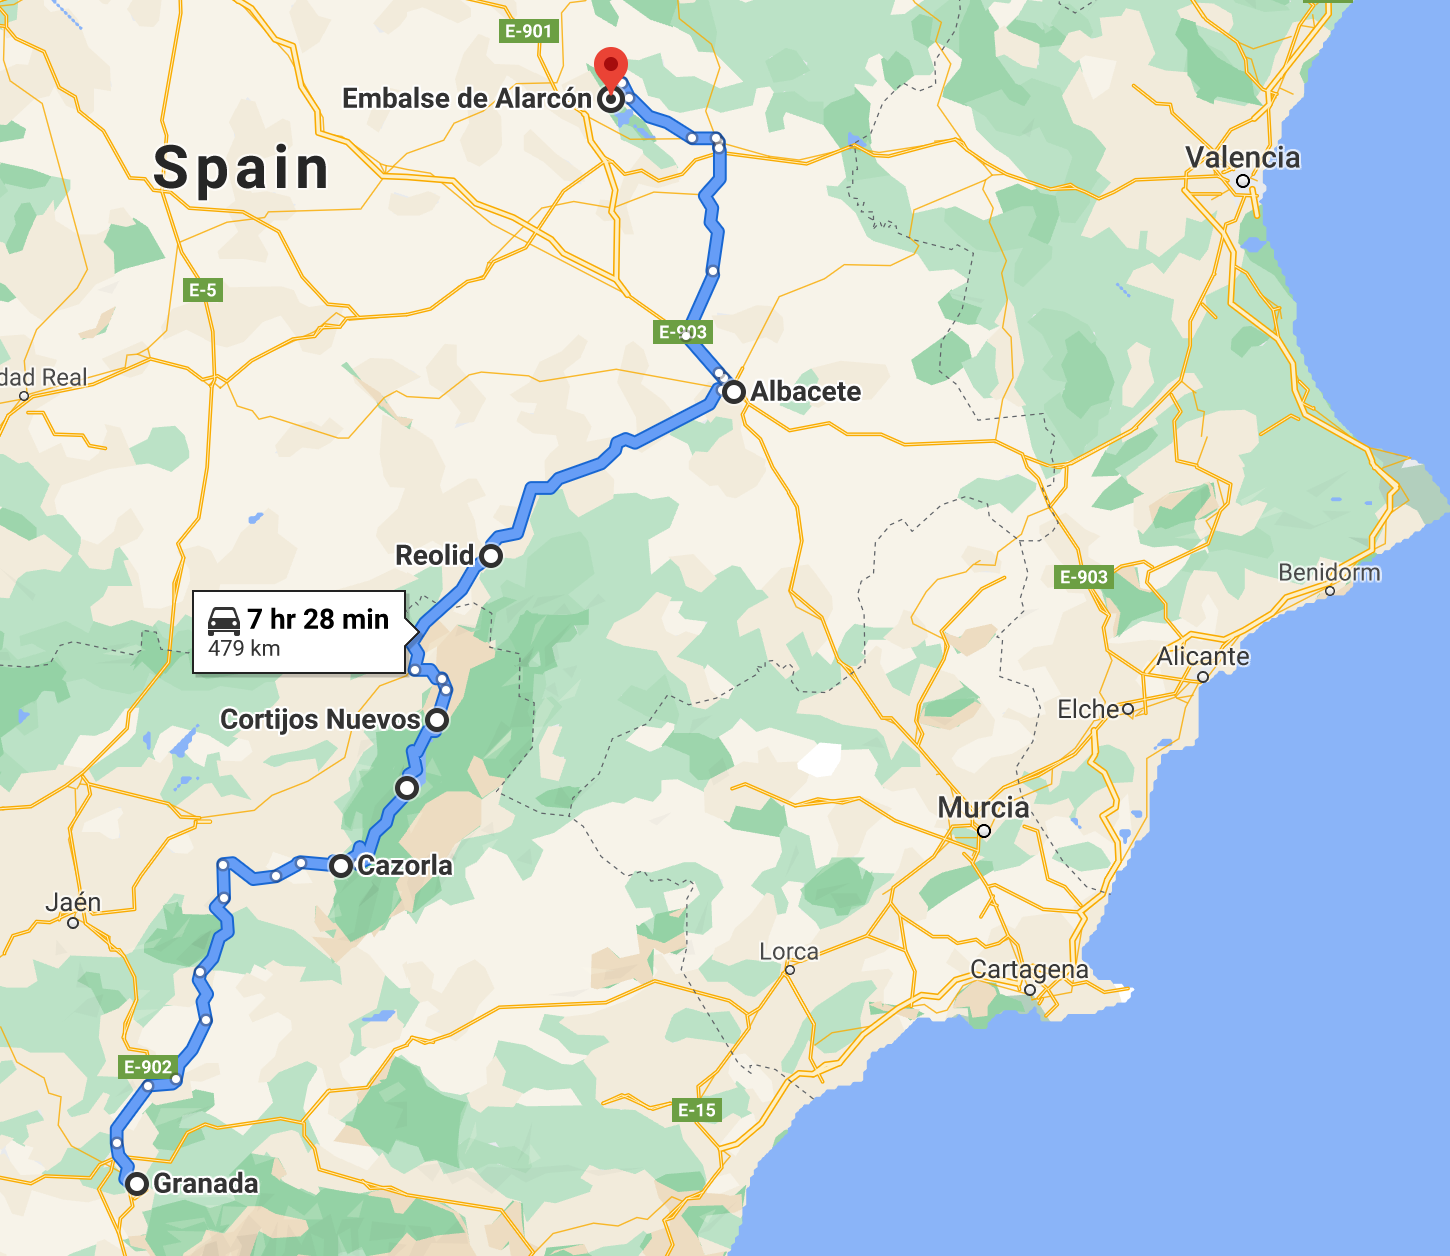 Euro 2020 Part 6 - National Park hopping from Granada to somewhere not far from Madrid